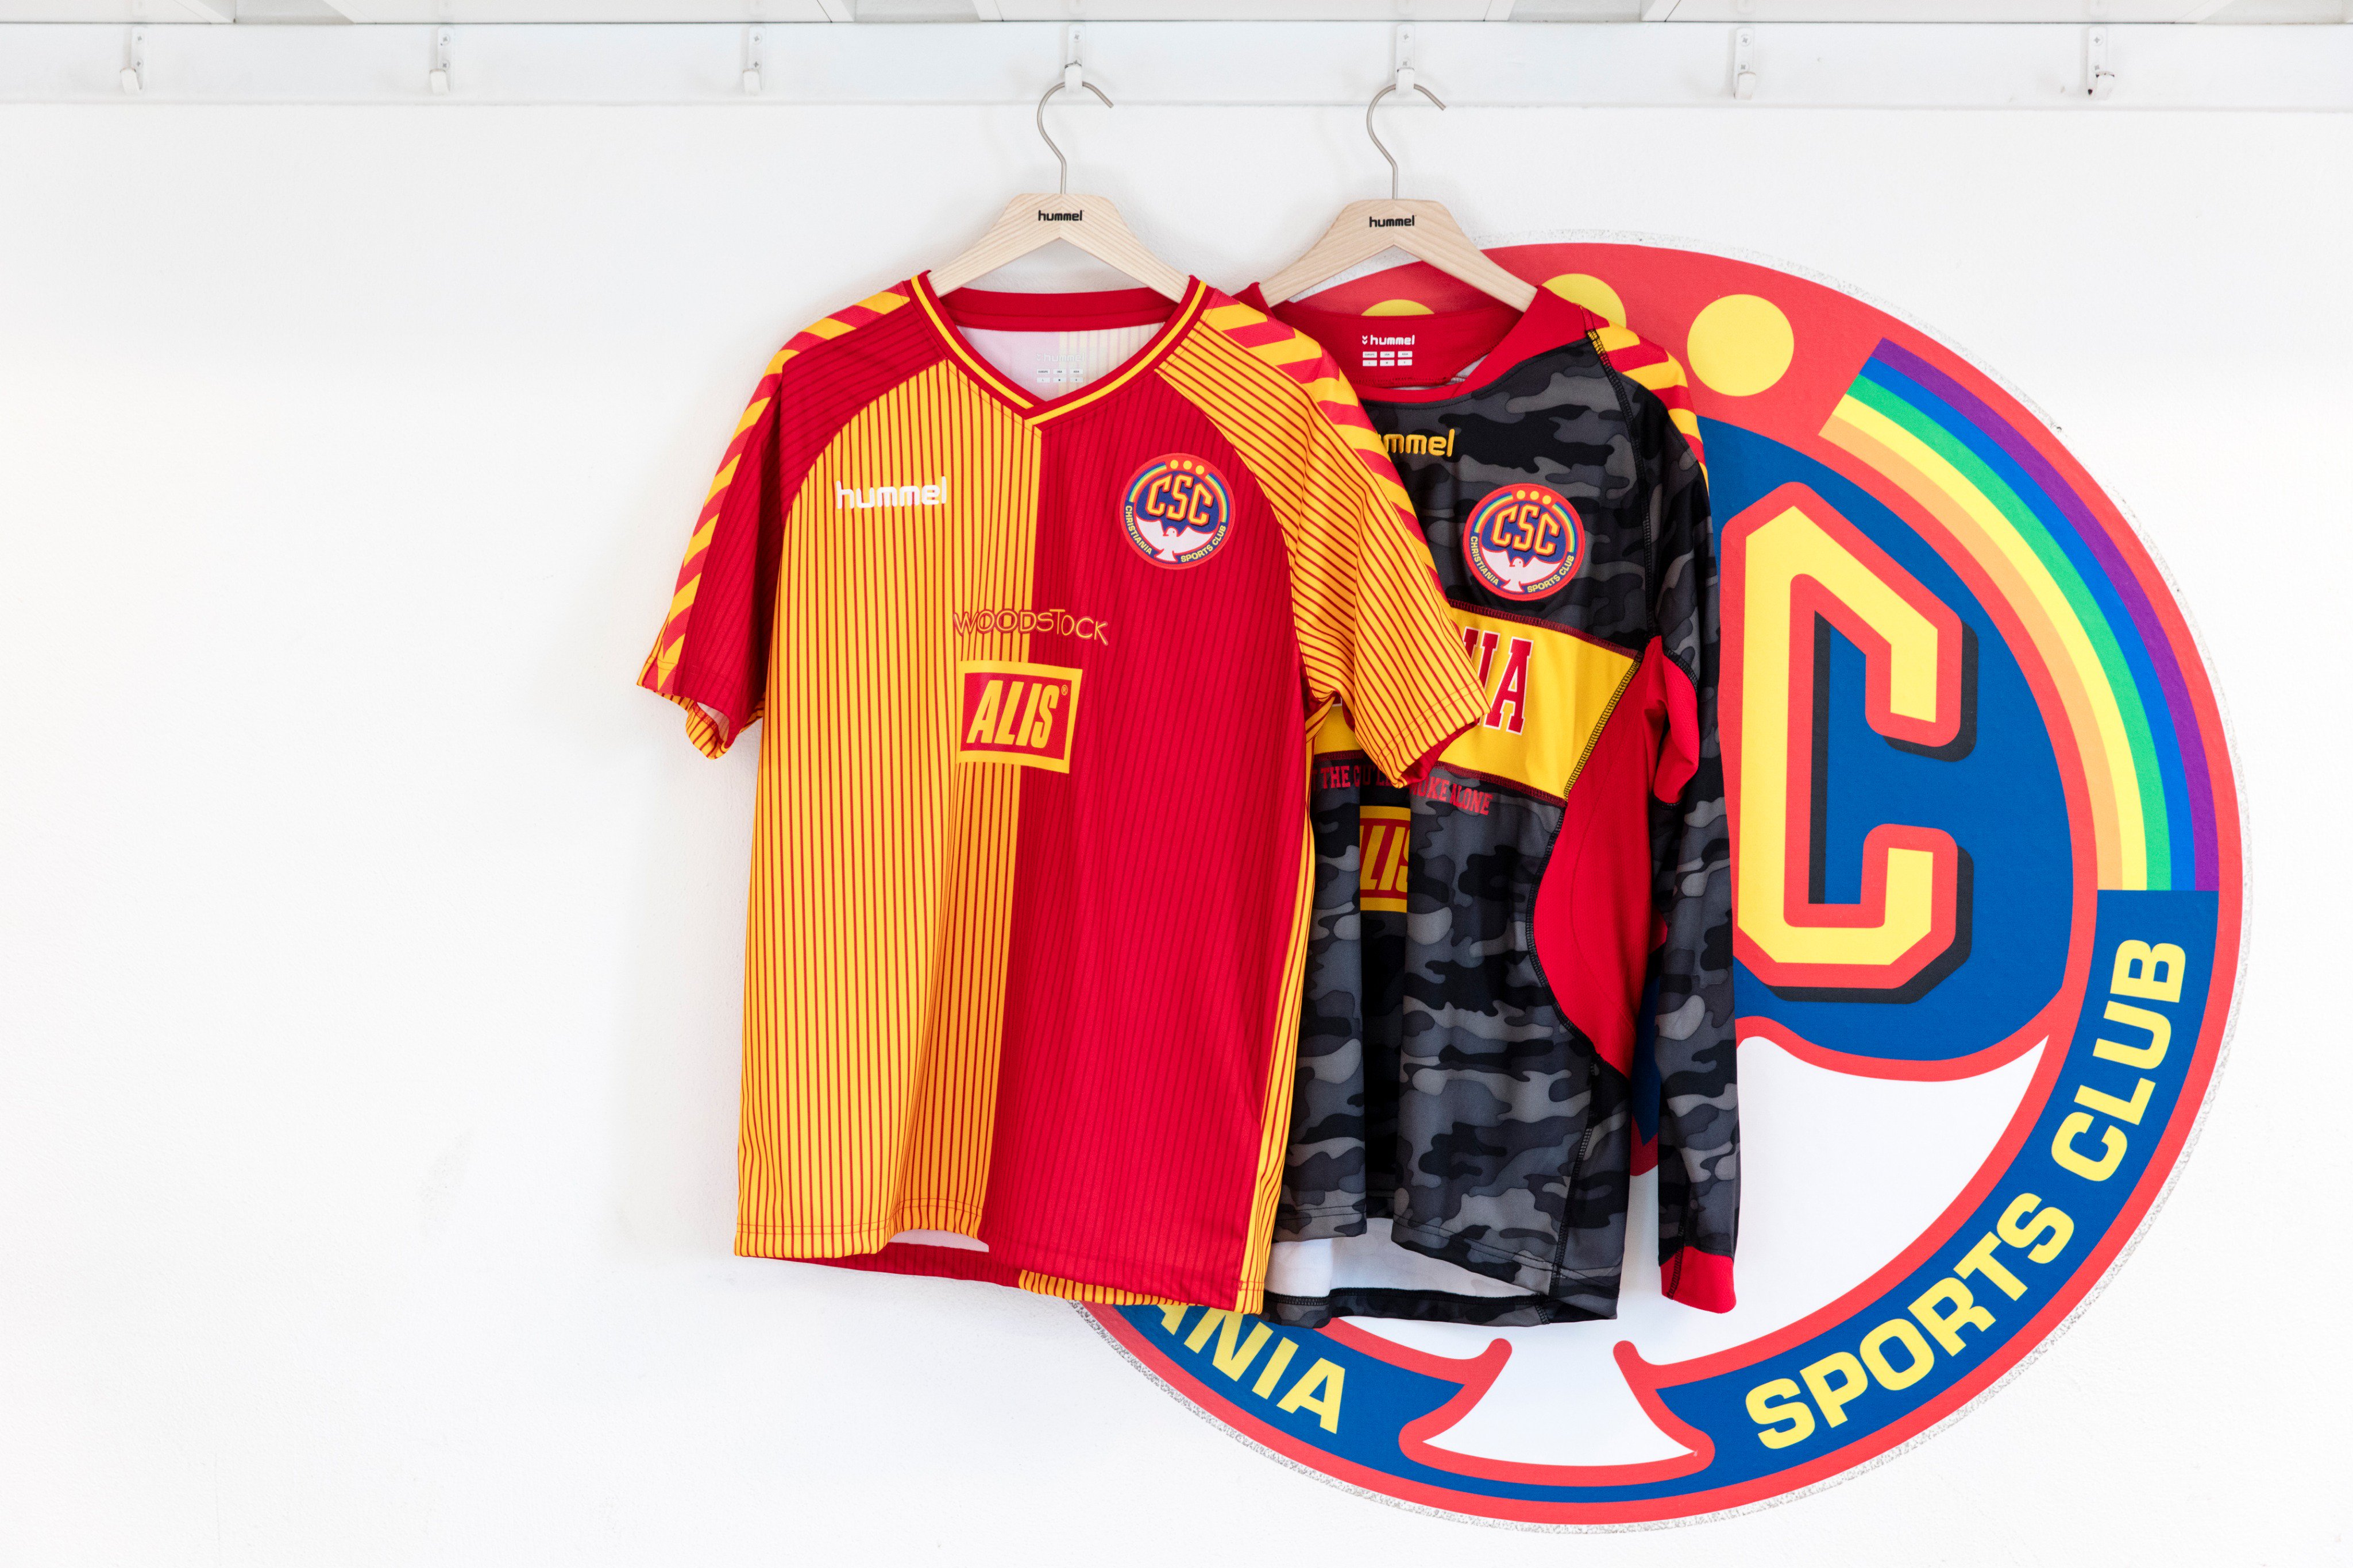 hummel Twitter: jersey-design with inspiration from 1986. Christiania Sports Club home in red and yellow - the of Freetown Christiania #sharefootball 💛💛💛| https://t.co/Vbj7CwO3Qi https://t.co/c4iWwJ1HWL" /